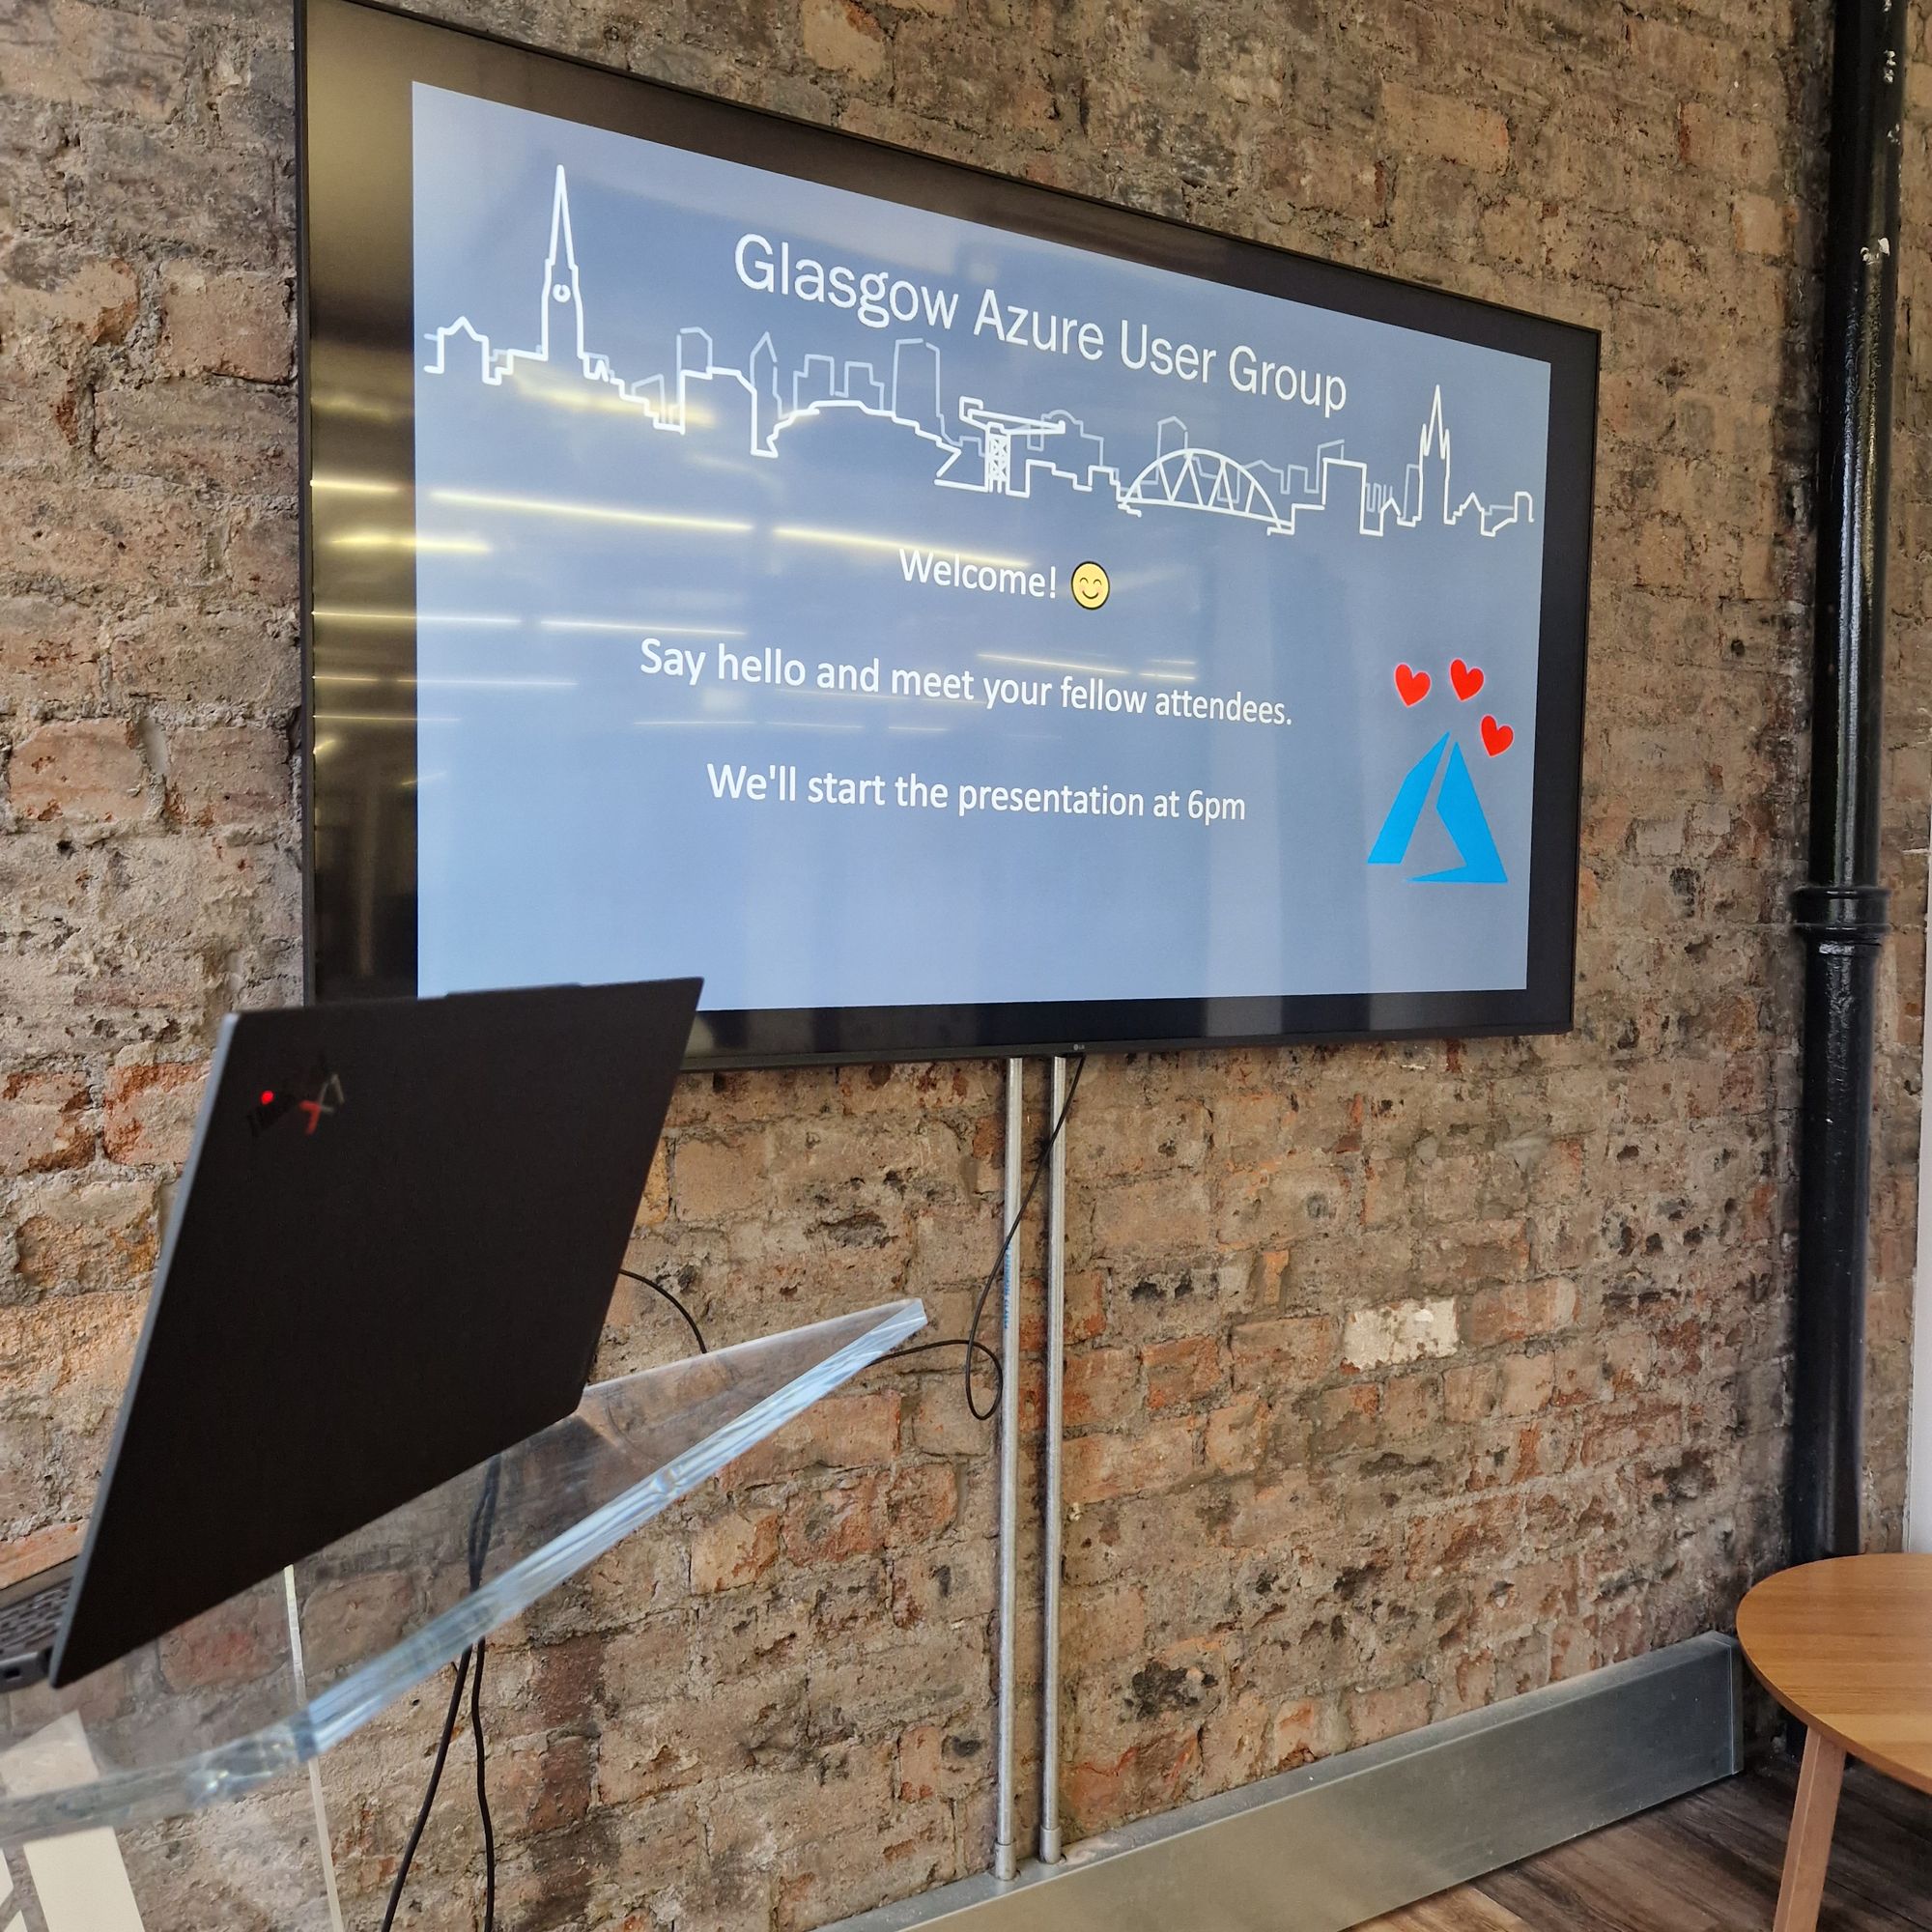 The Glasgow Azure User Group